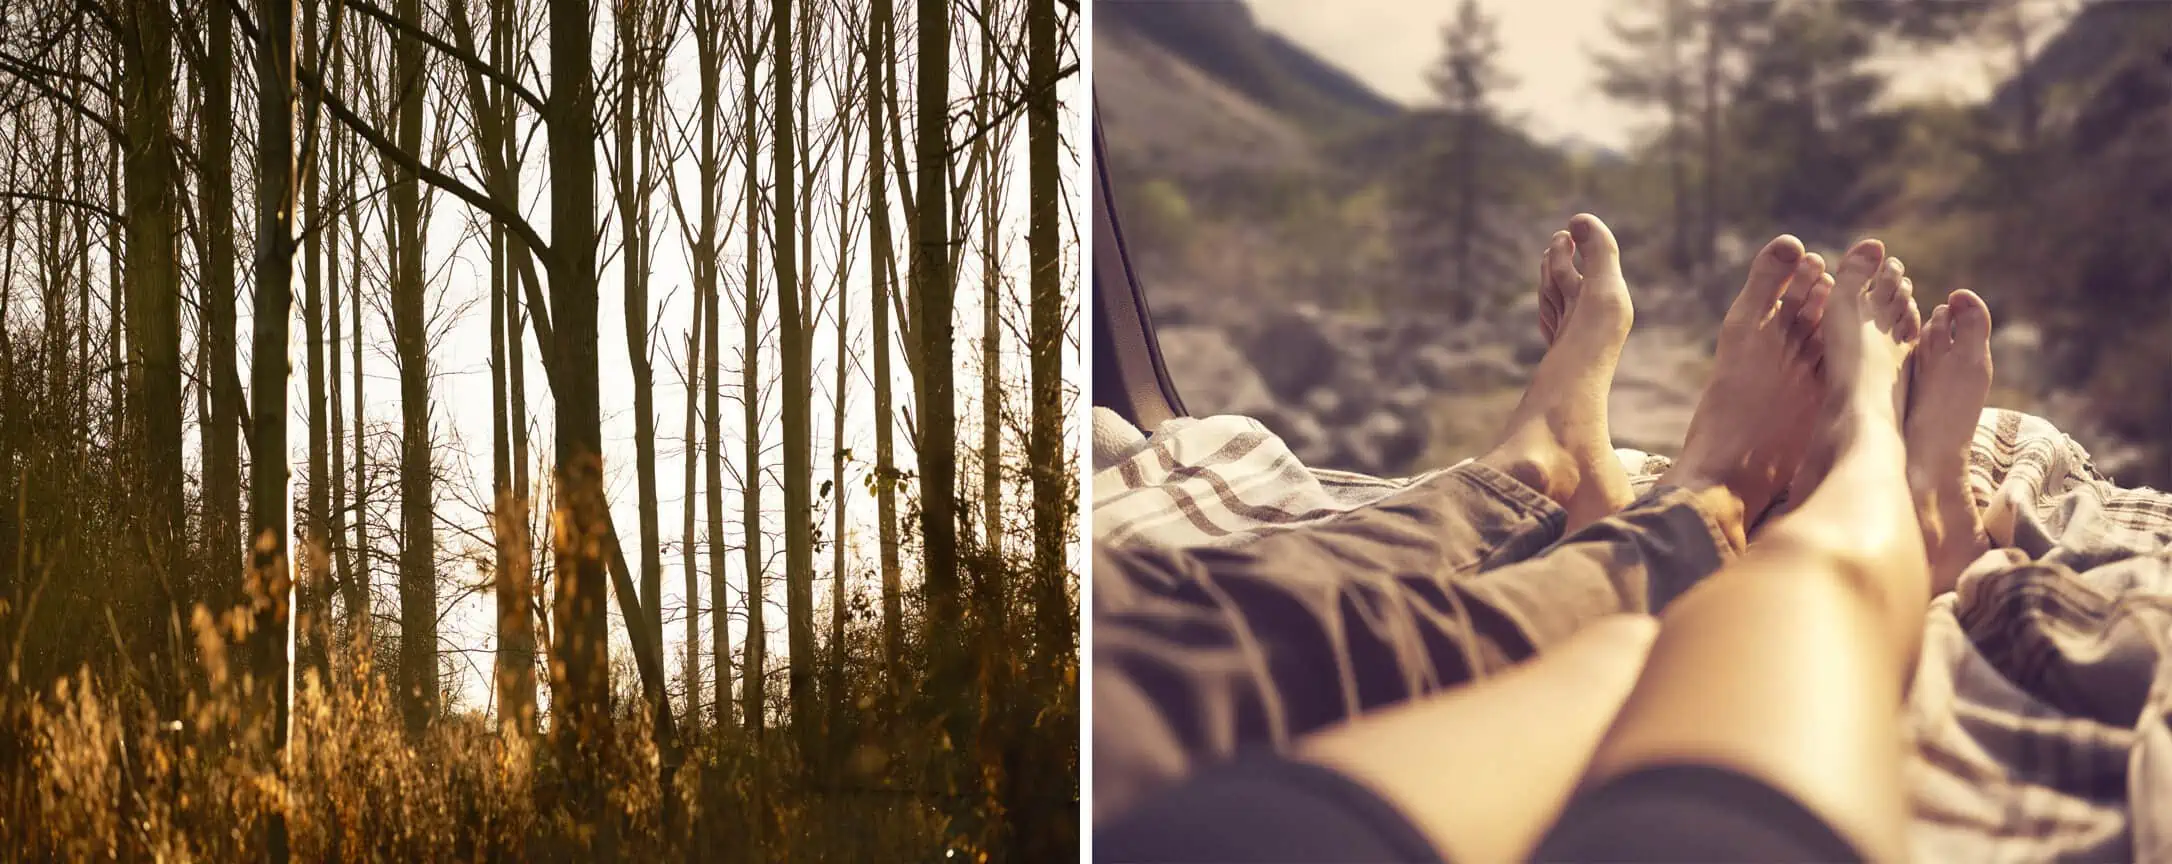 ID: From left to right 1: A landscape image. A close up detail of trees in a forest. There is golden light that is catching a bush in the foreground with yellow foliage. 2: A landscape image. A close up of legs in the back of a car - there is a brown hazy light. In the background are trees.